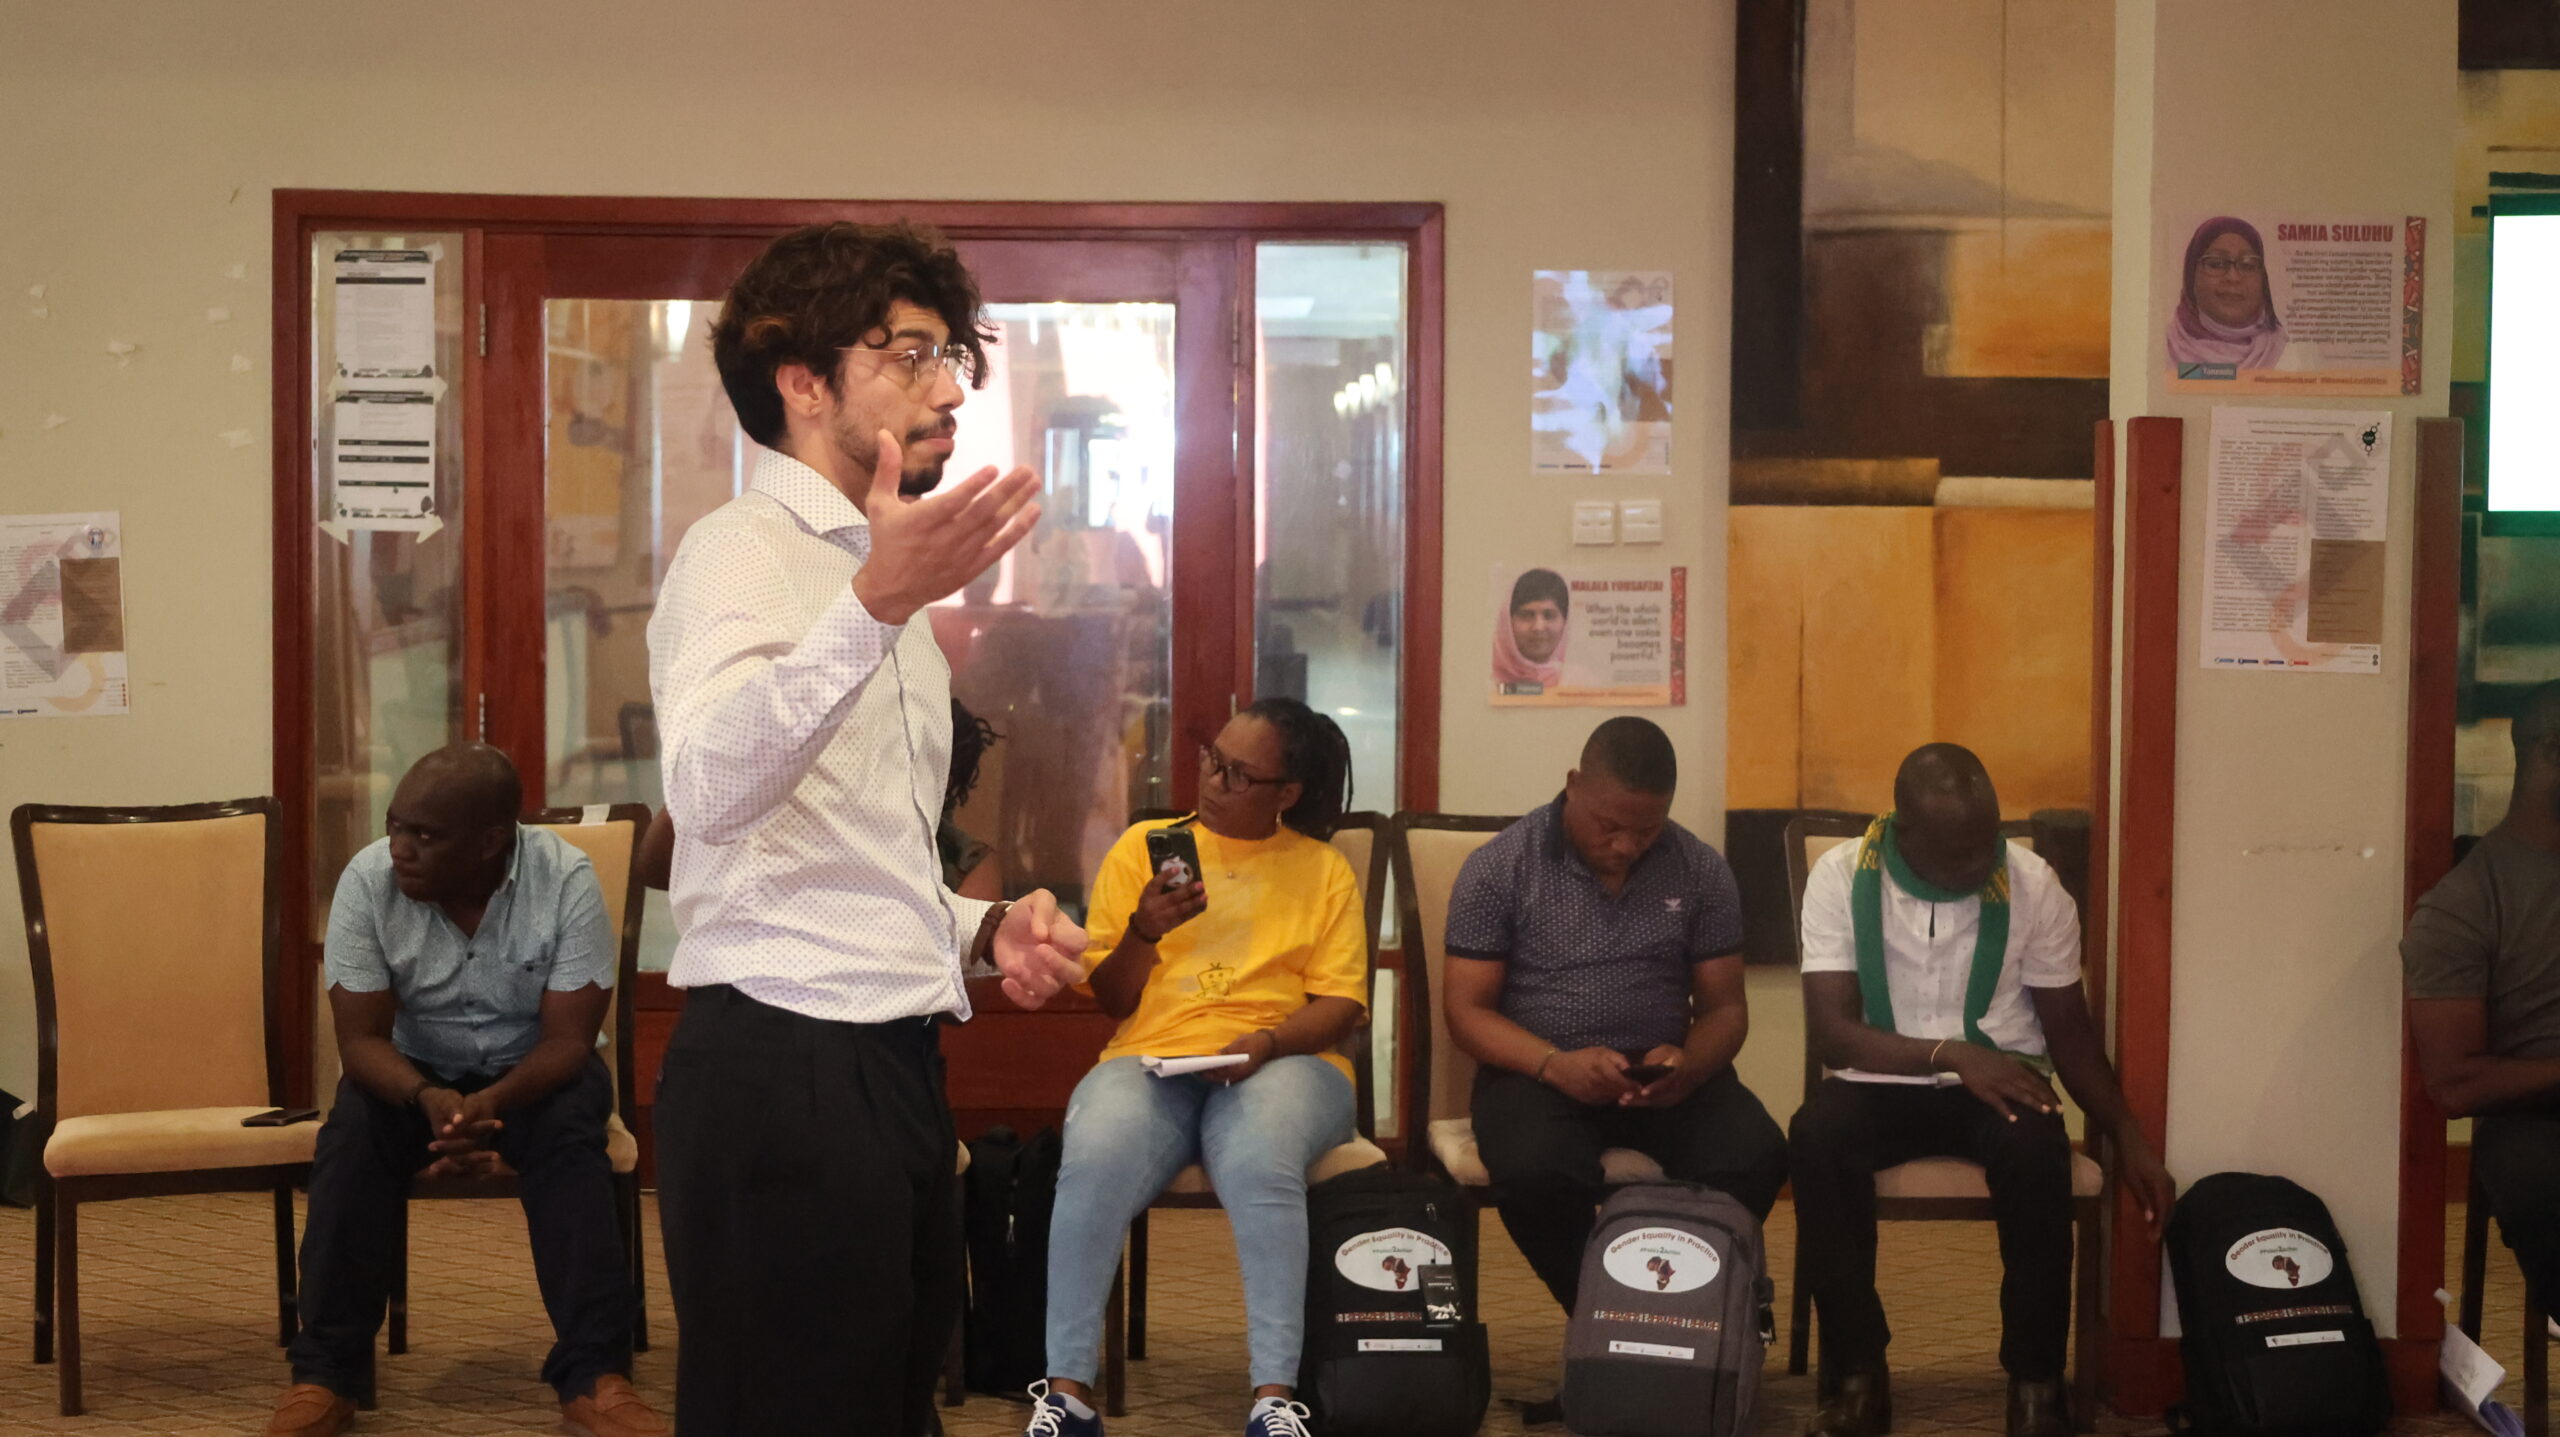 Muhammad delivering a workshop centered around peer-to-peer exchange networking at the event.